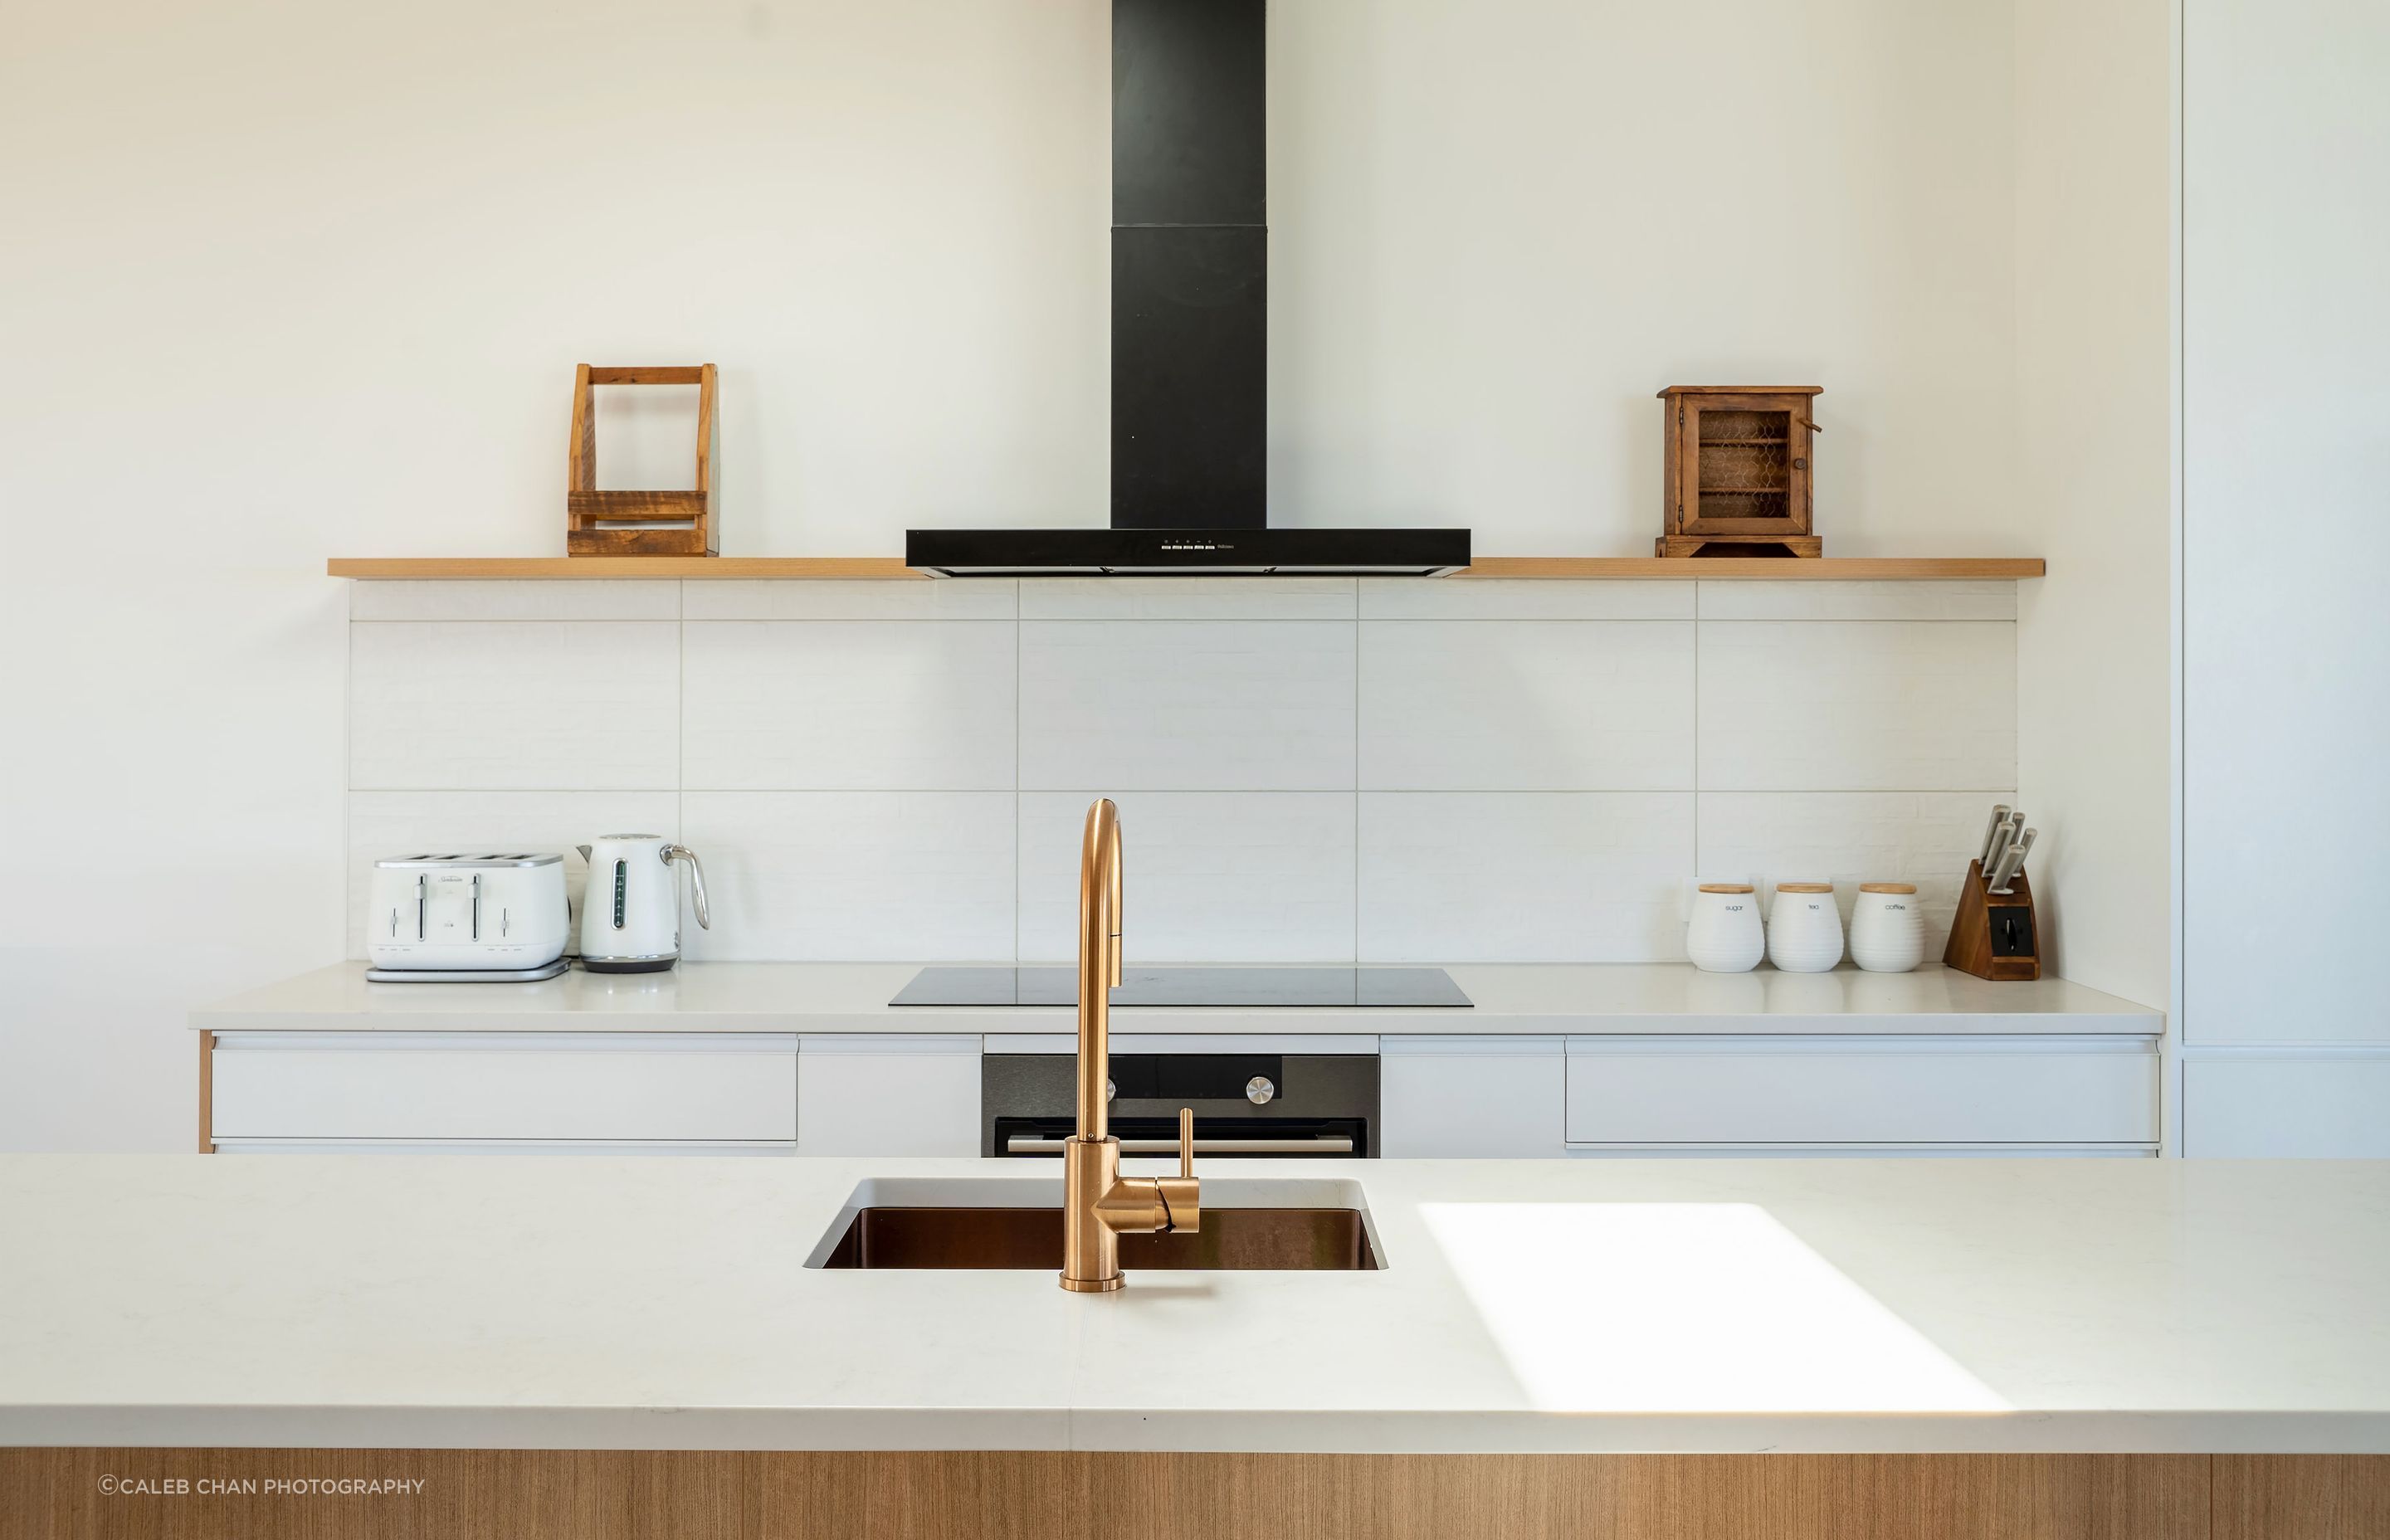 The clean, modern kitchen is the central hub of the living space. Allowing occupants to move from the kitchen outwards in any direction to the most suitable spot for a feed